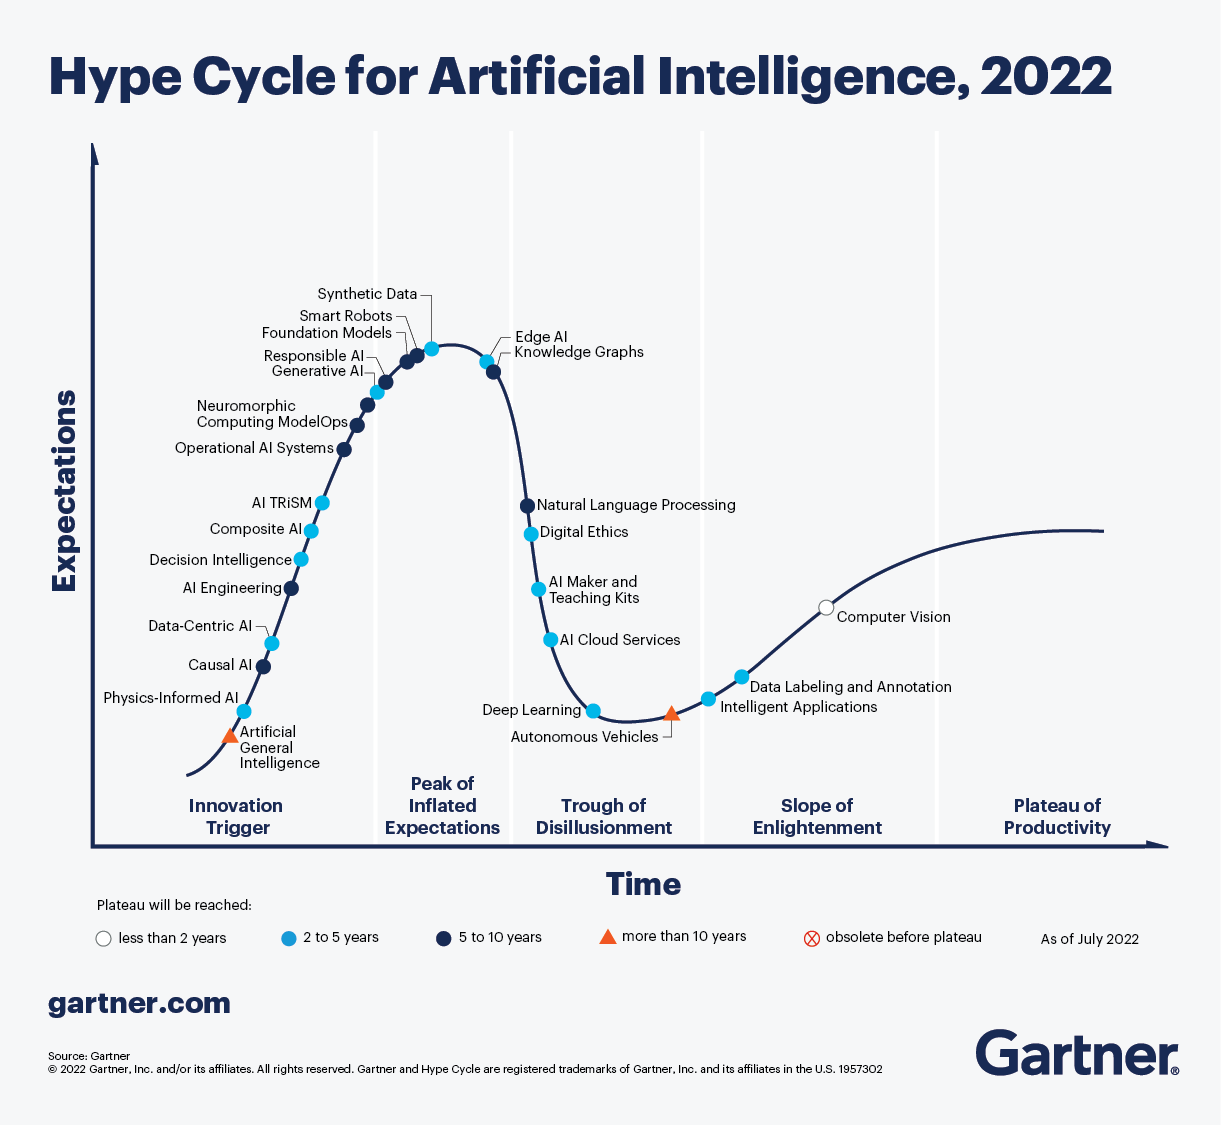 Gartner-hype-cycle-for-artificial-intelligence-2022